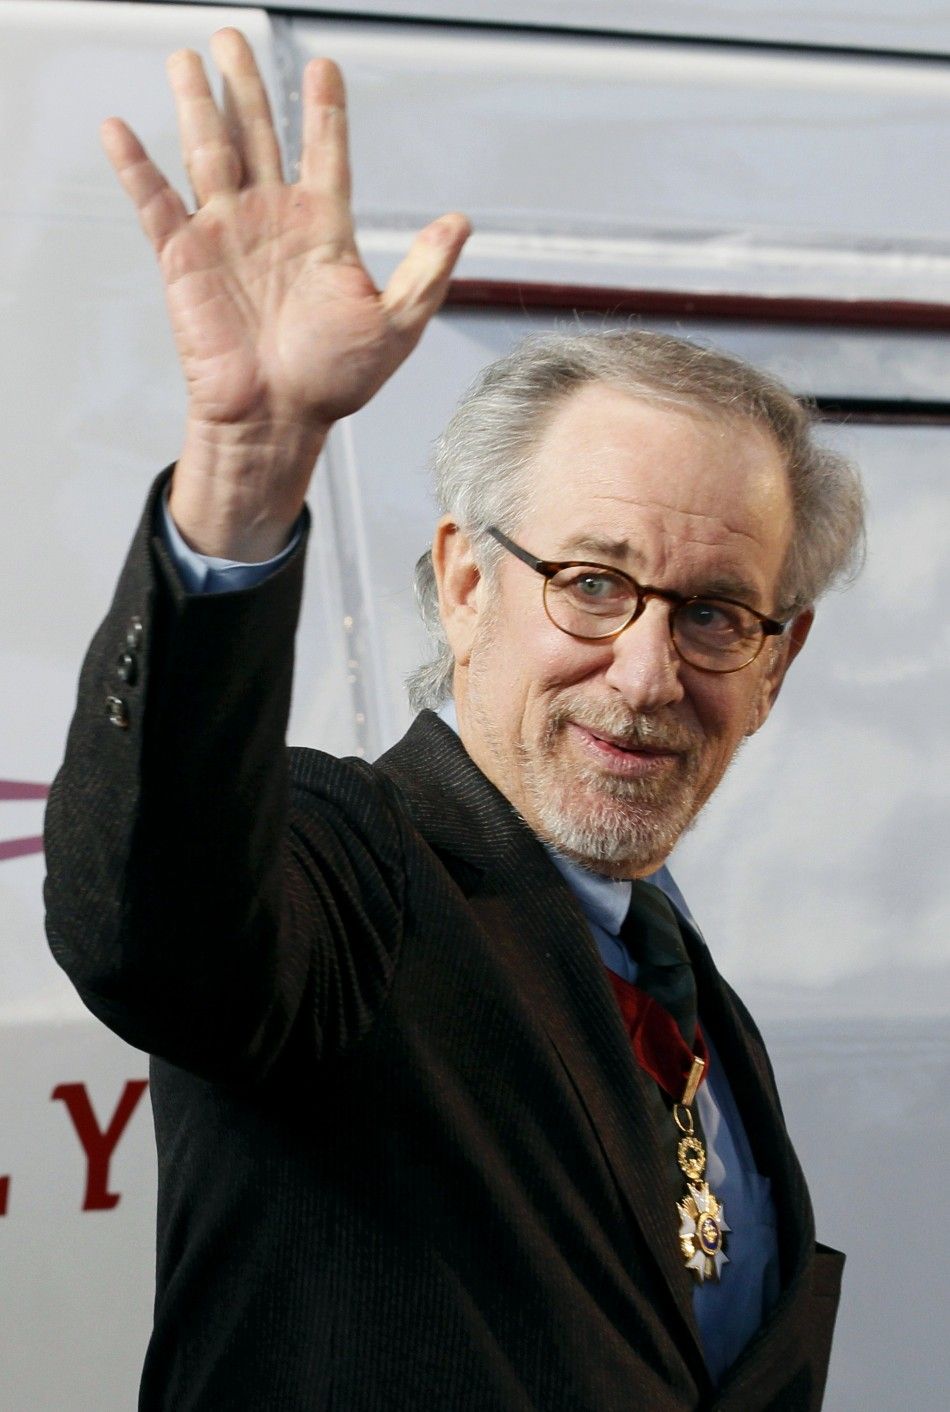 Director Steven Splielberg waves during the launch of a Tintin Thalys high-speed train in Brussels